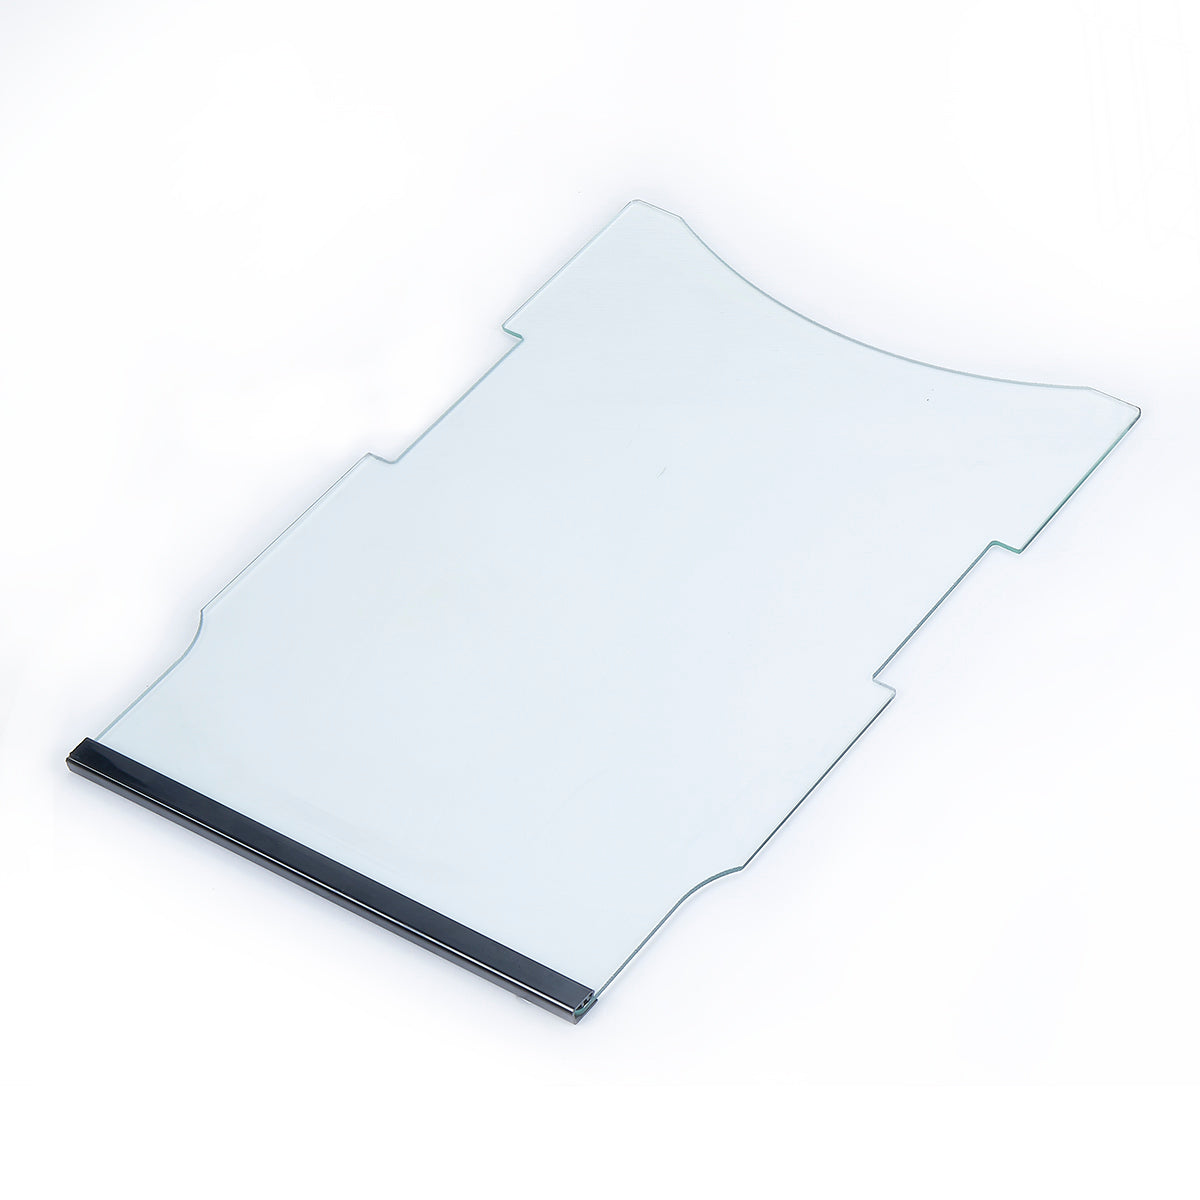 A white rectangular object with a black border, featuring a clear plastic sheet with a black border and a white sheet of paper.